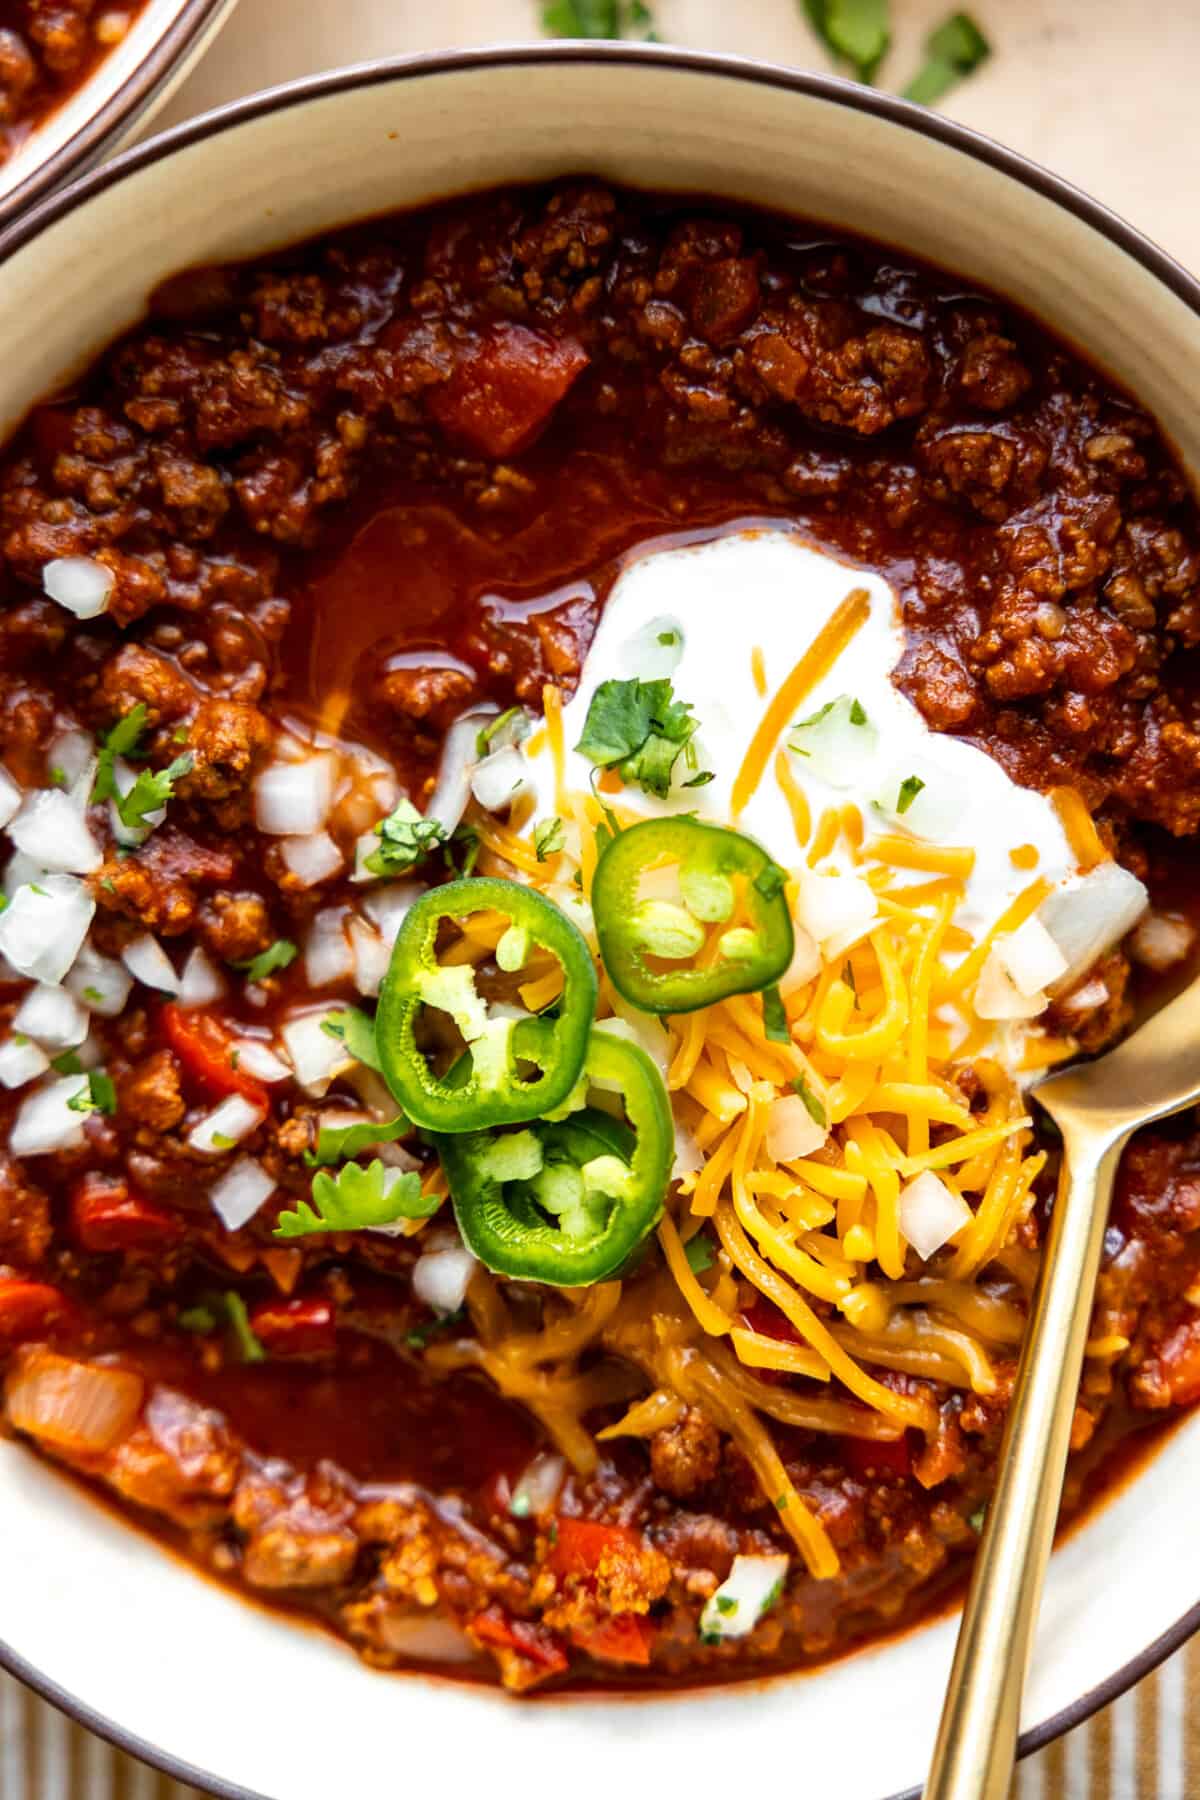 Bowl filled with easy to make Texas Chili made with ground beef and no beans.